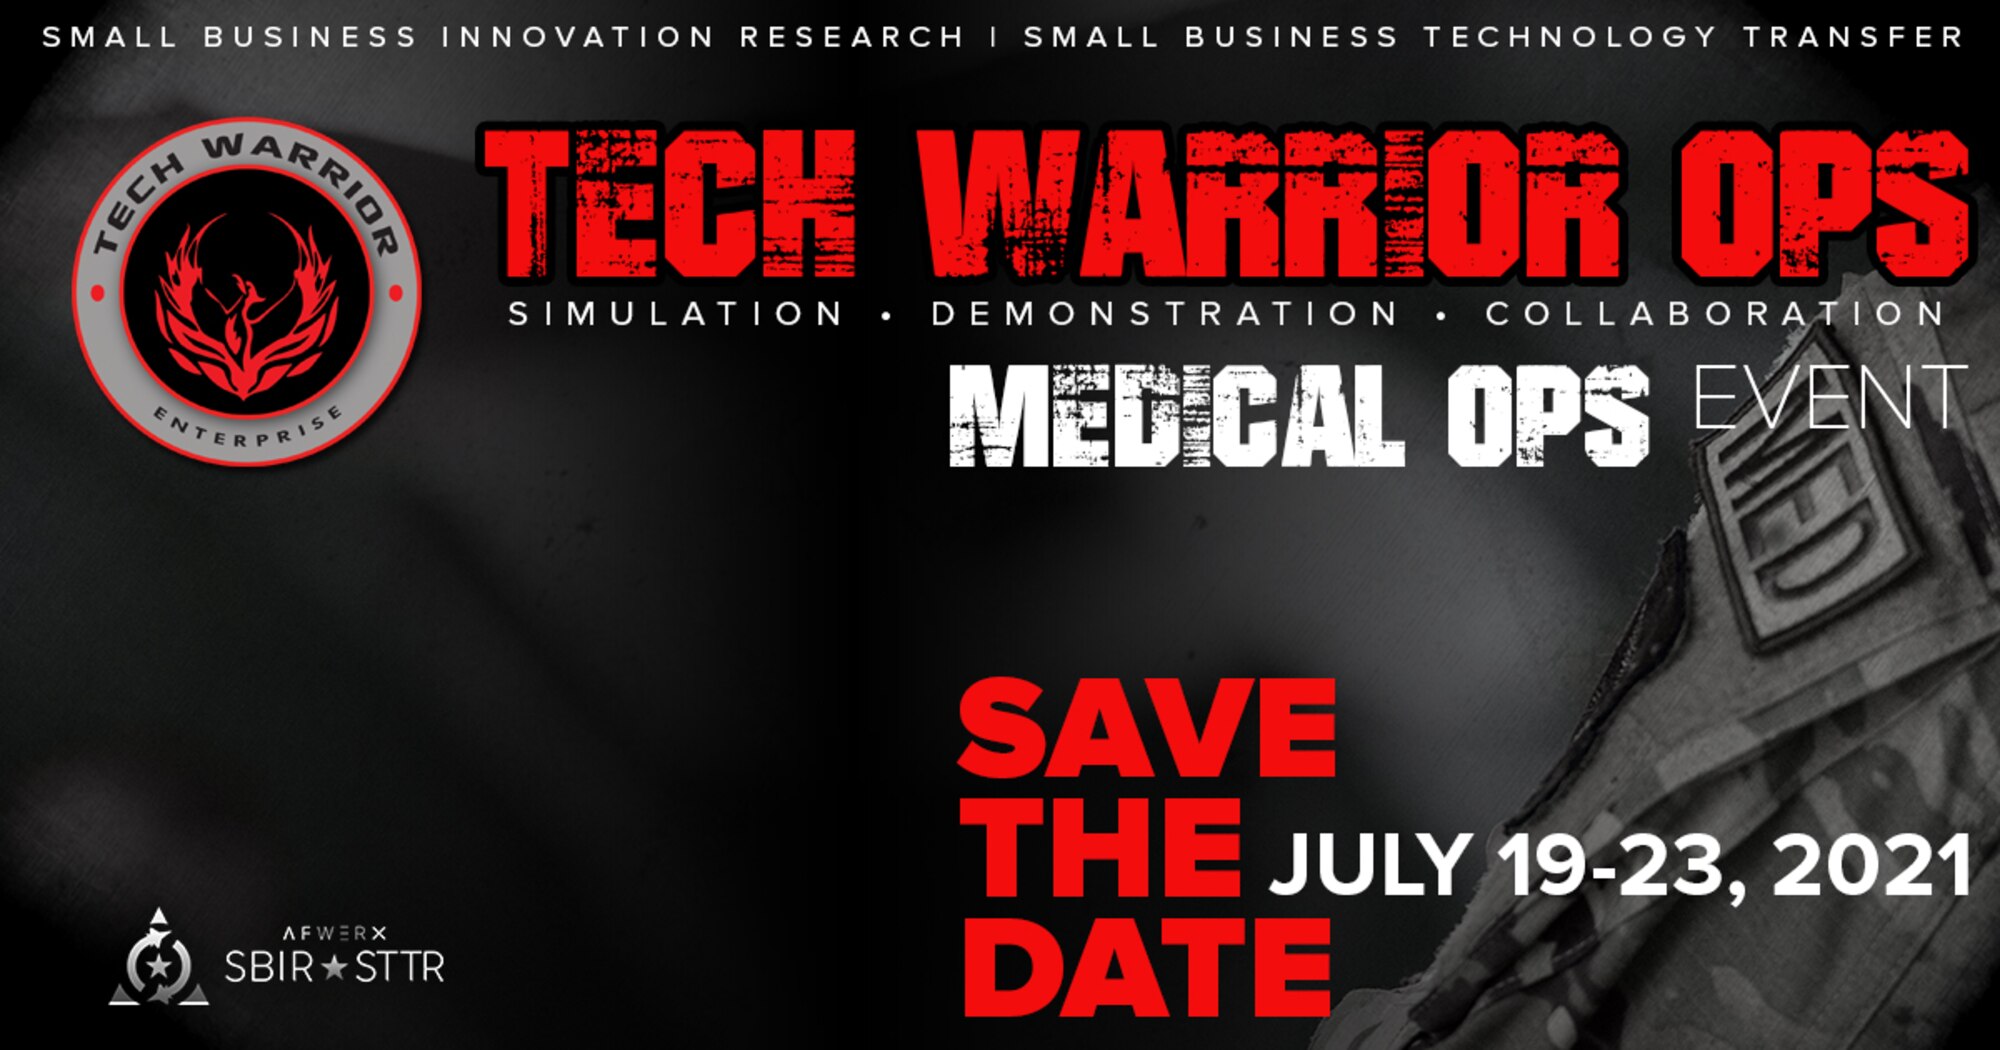 Join the Tech Warrior Enterprise team for the Tech Warrior Medical OPS event scheduled for July 19-23, 2021. Government tech scouts, industry subject matter experts, and many small businesses will be in attendance. (Courtesy graphic)